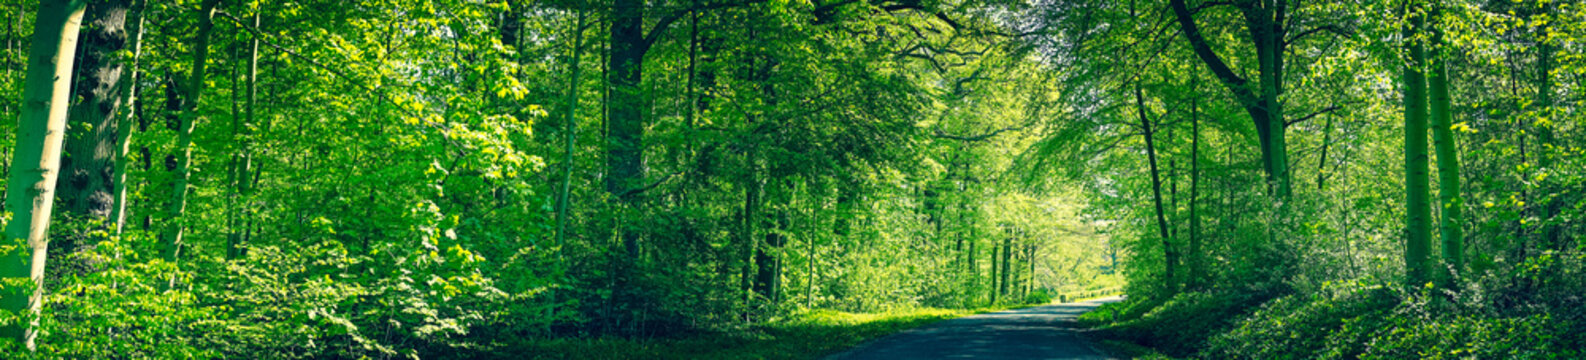 Forest in green colors with a road